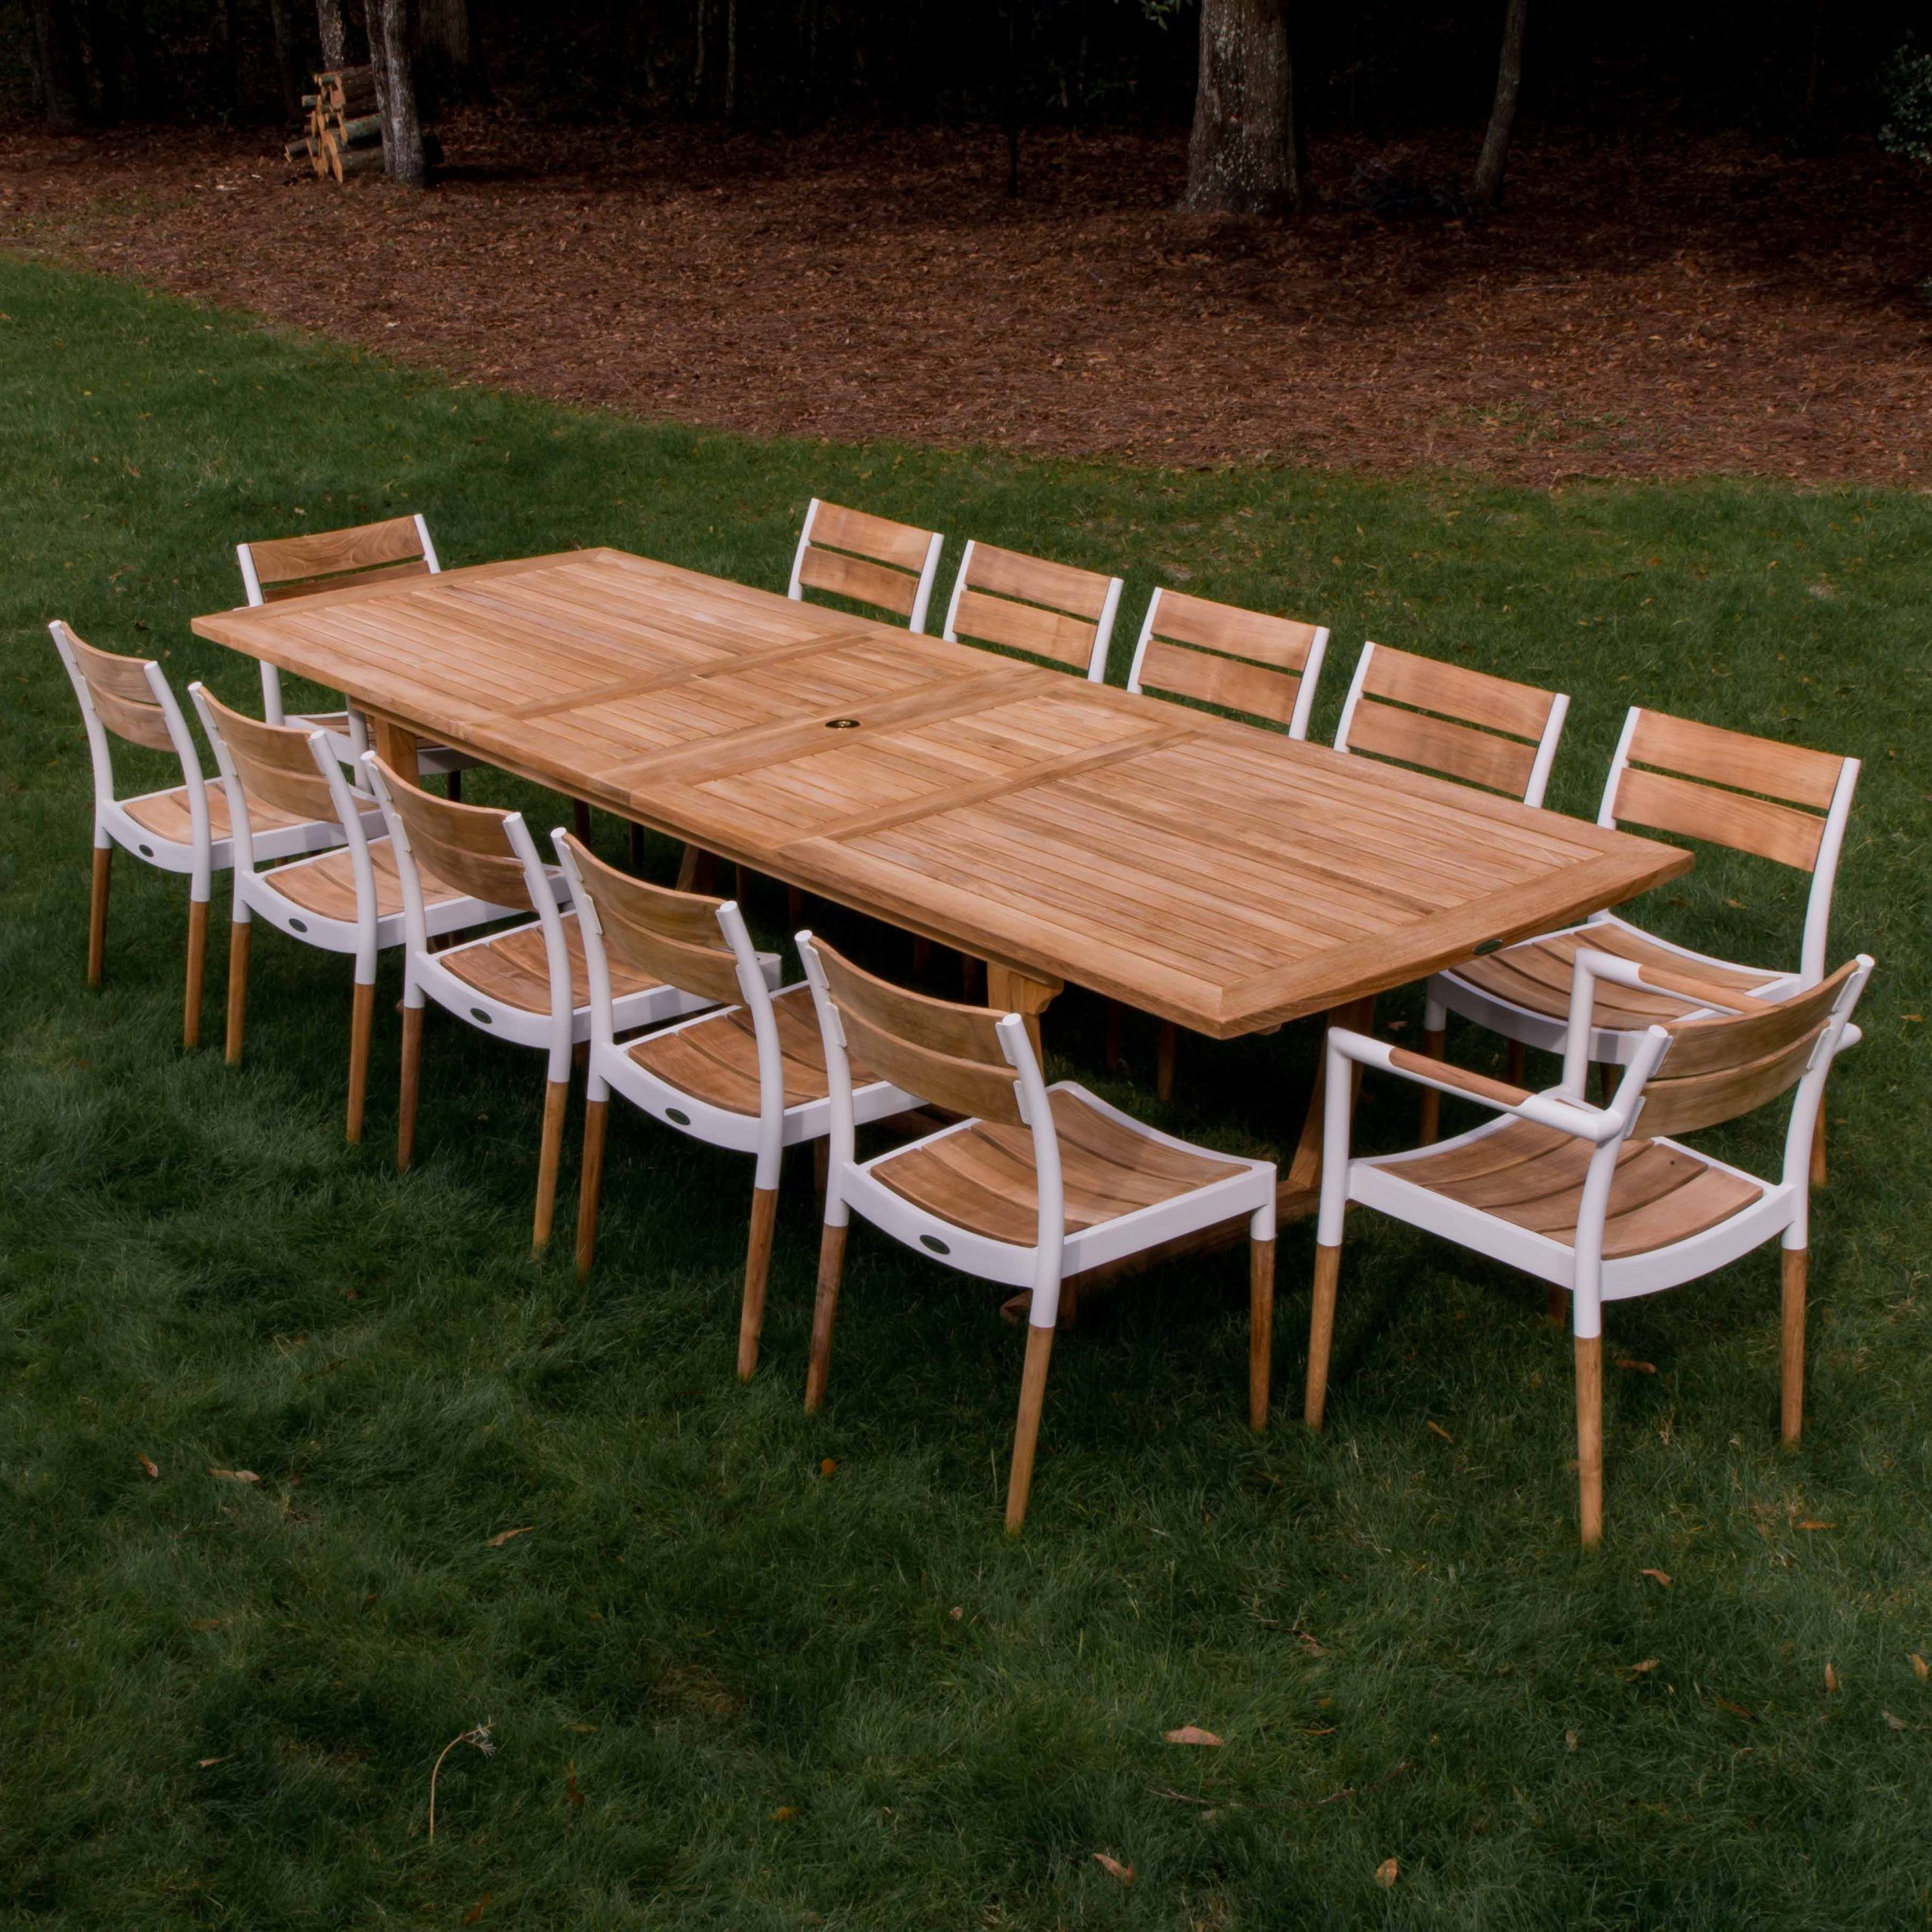 13 Piece Extendable Patio Dining Sets Within Most Popular 13 Piece Outdoor Teak Dining Set (View 2 of 15)